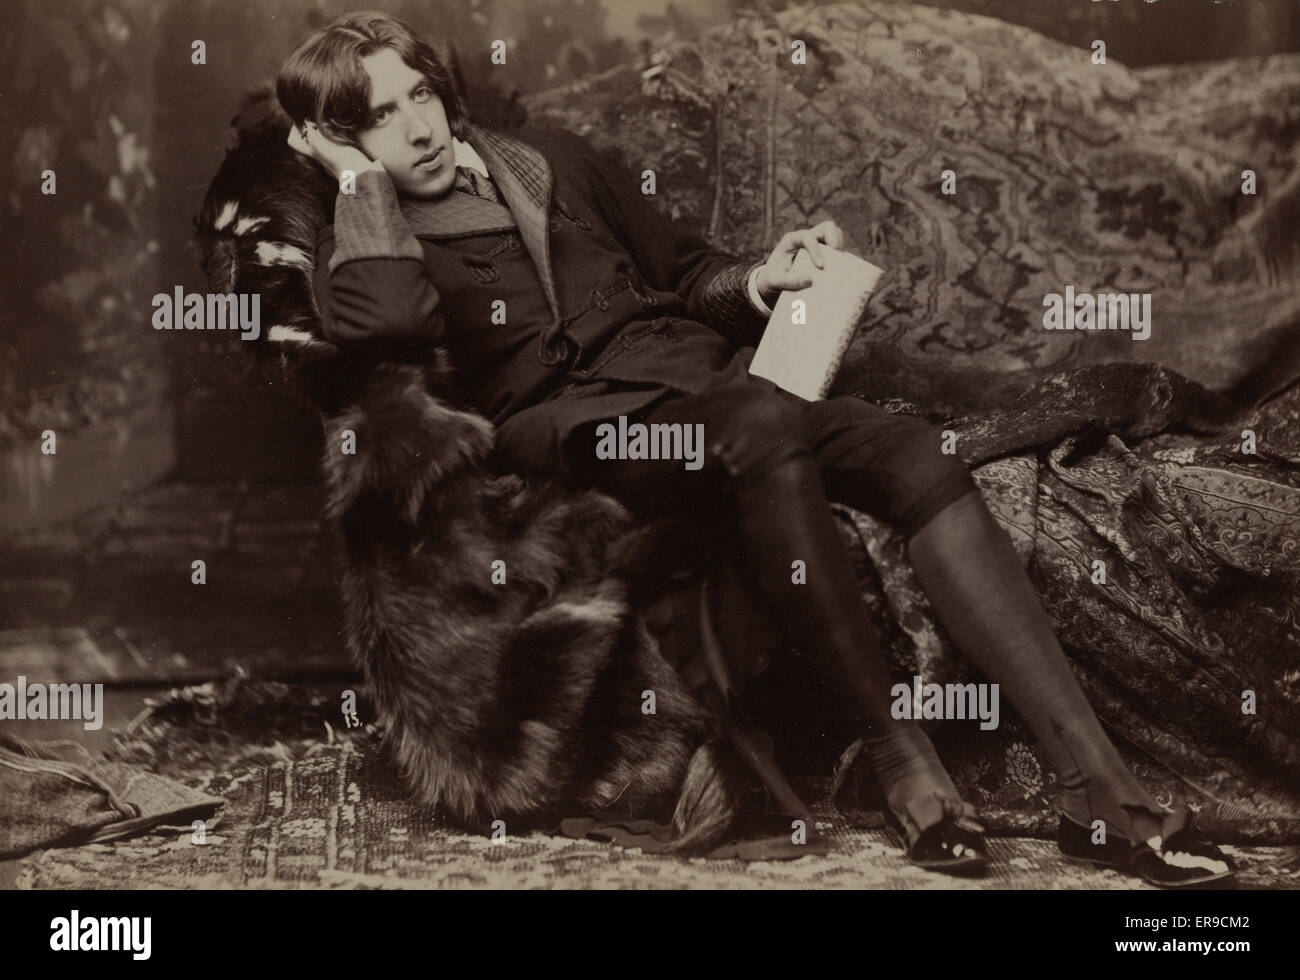 Oscar Wilde. Oscar Wilde, full-length portrait, facing right, sitting in chair, right hand on cheek, left hand holding book. Date c1882. Stock Photo